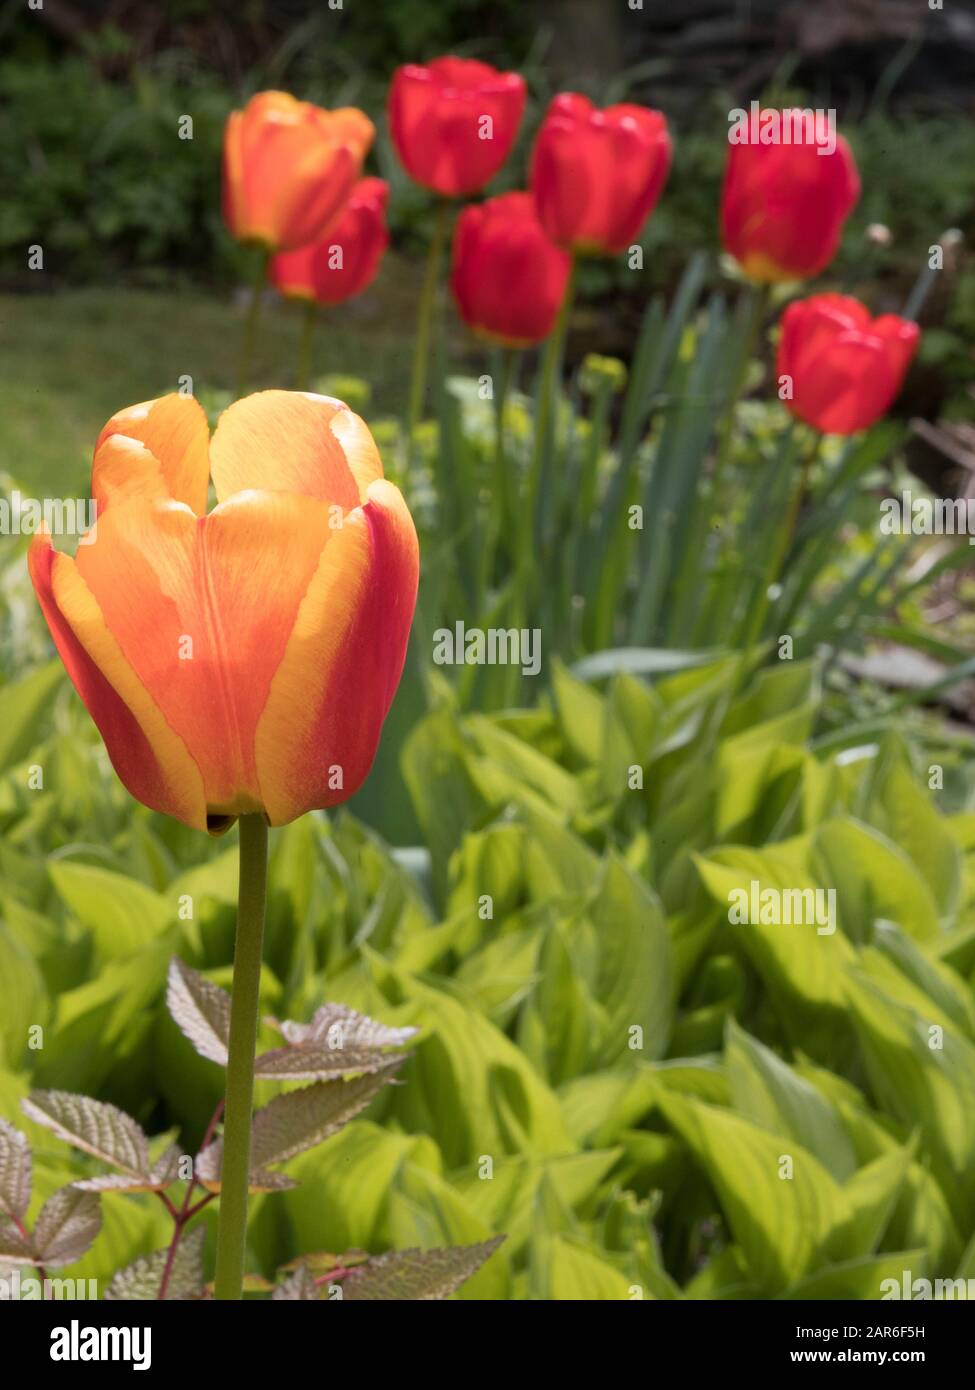 Tulips In An English Park Stock Photo